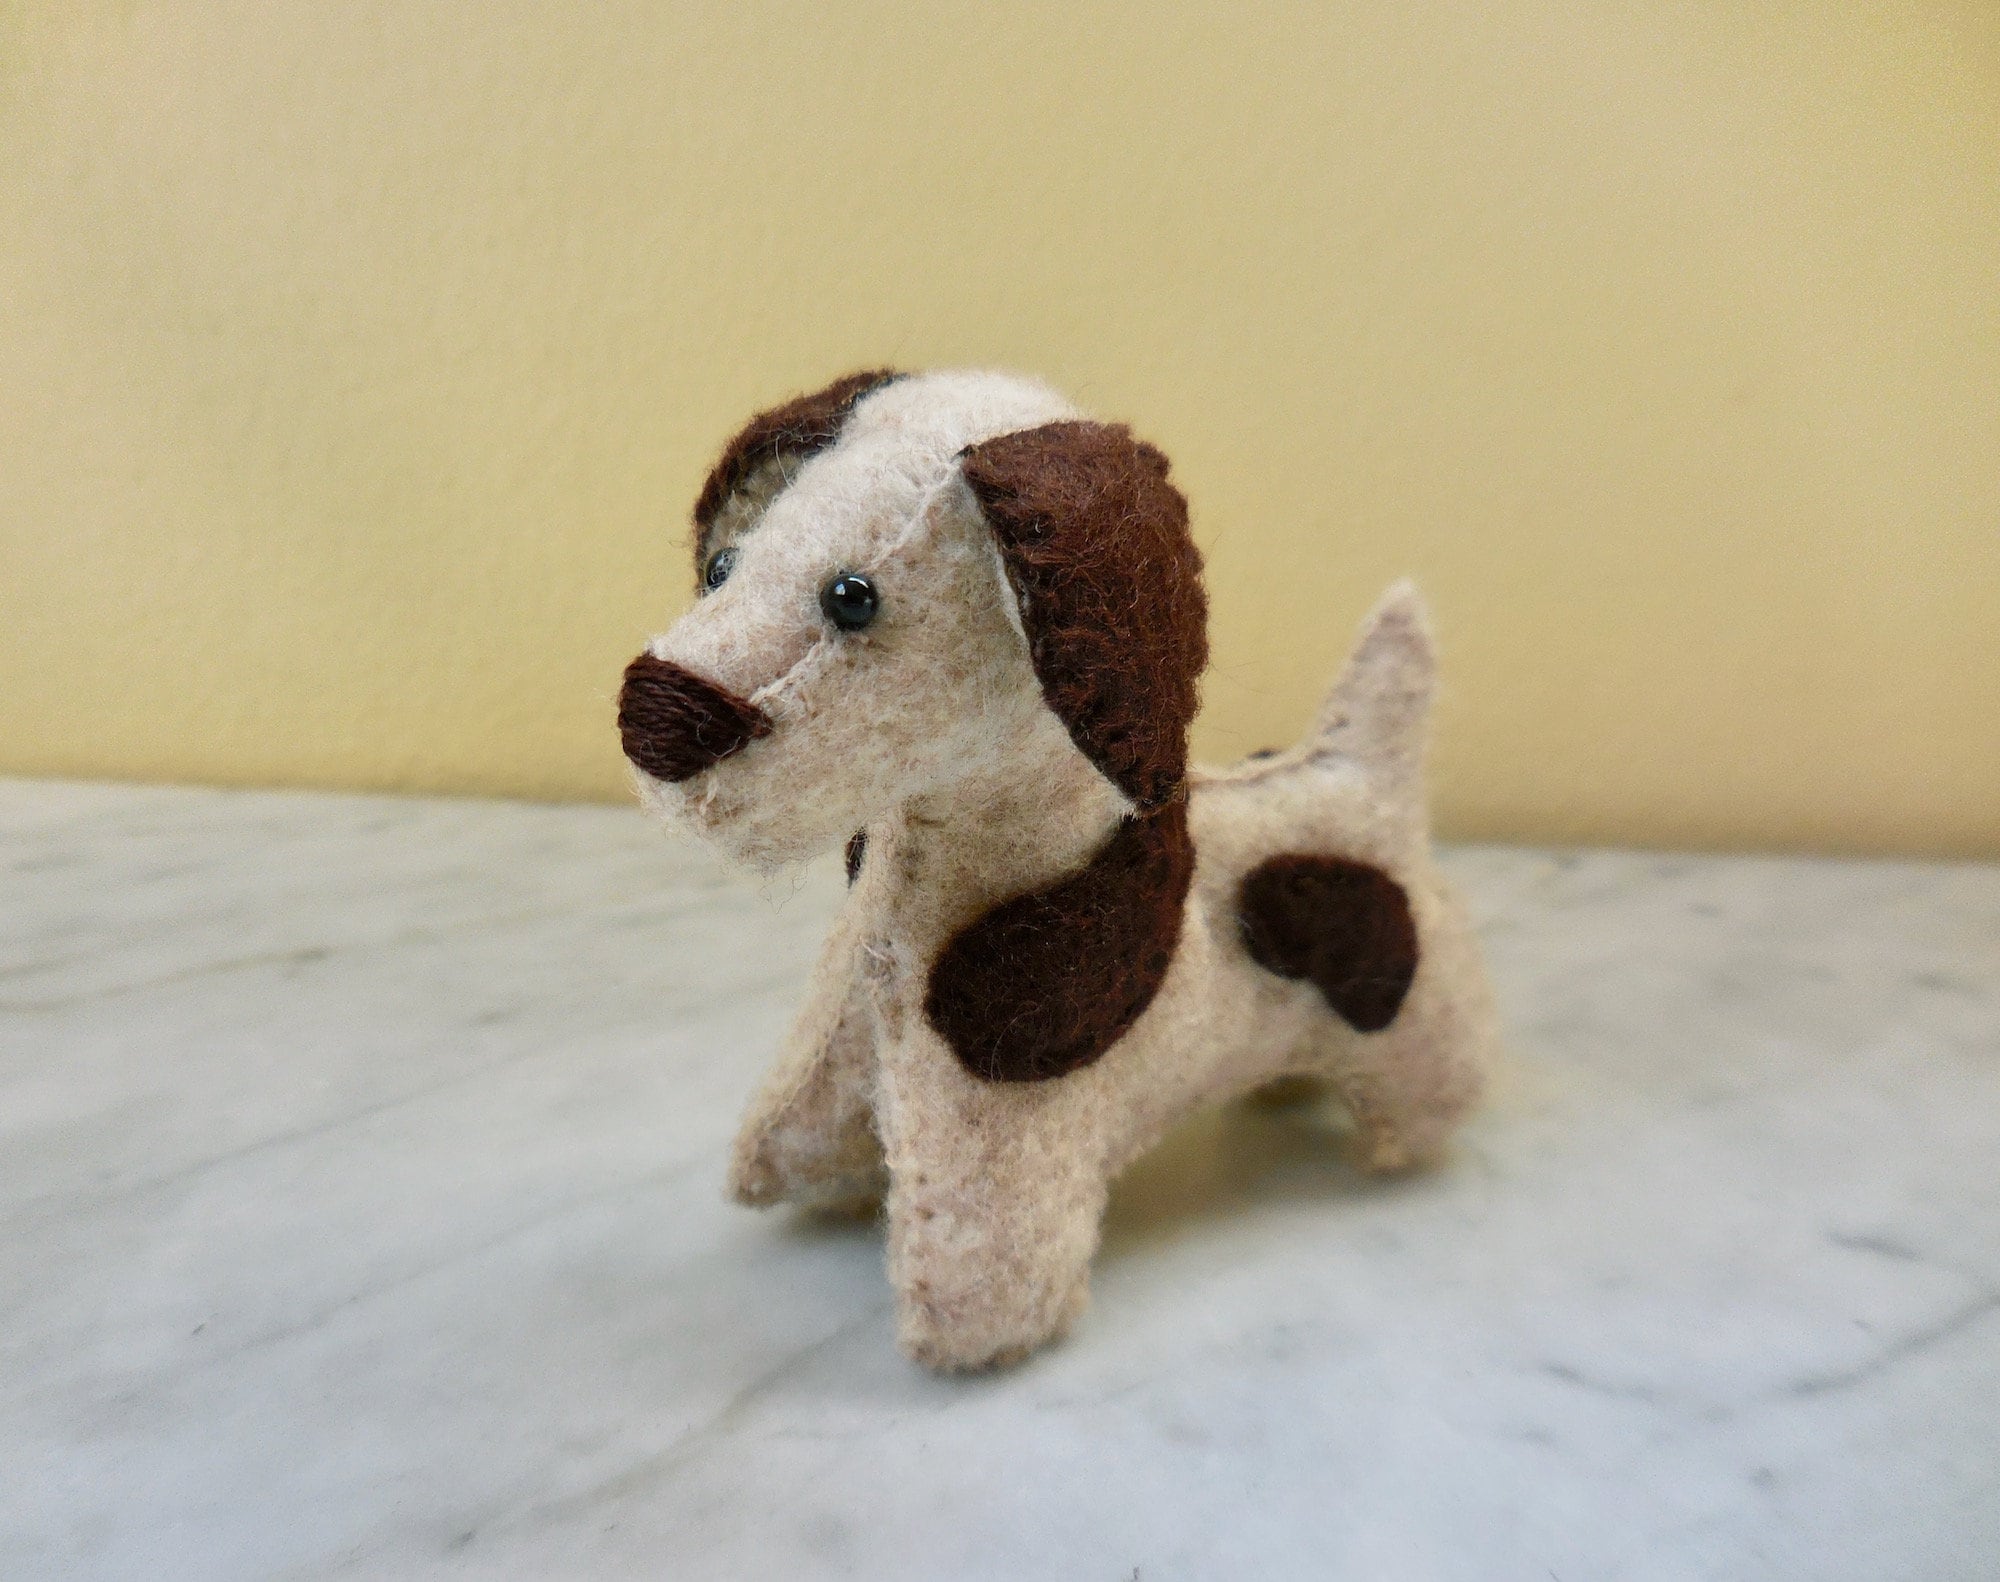 Football Spotty Dog - 12 Personalized Plush – Say it with a Stuffed Animal